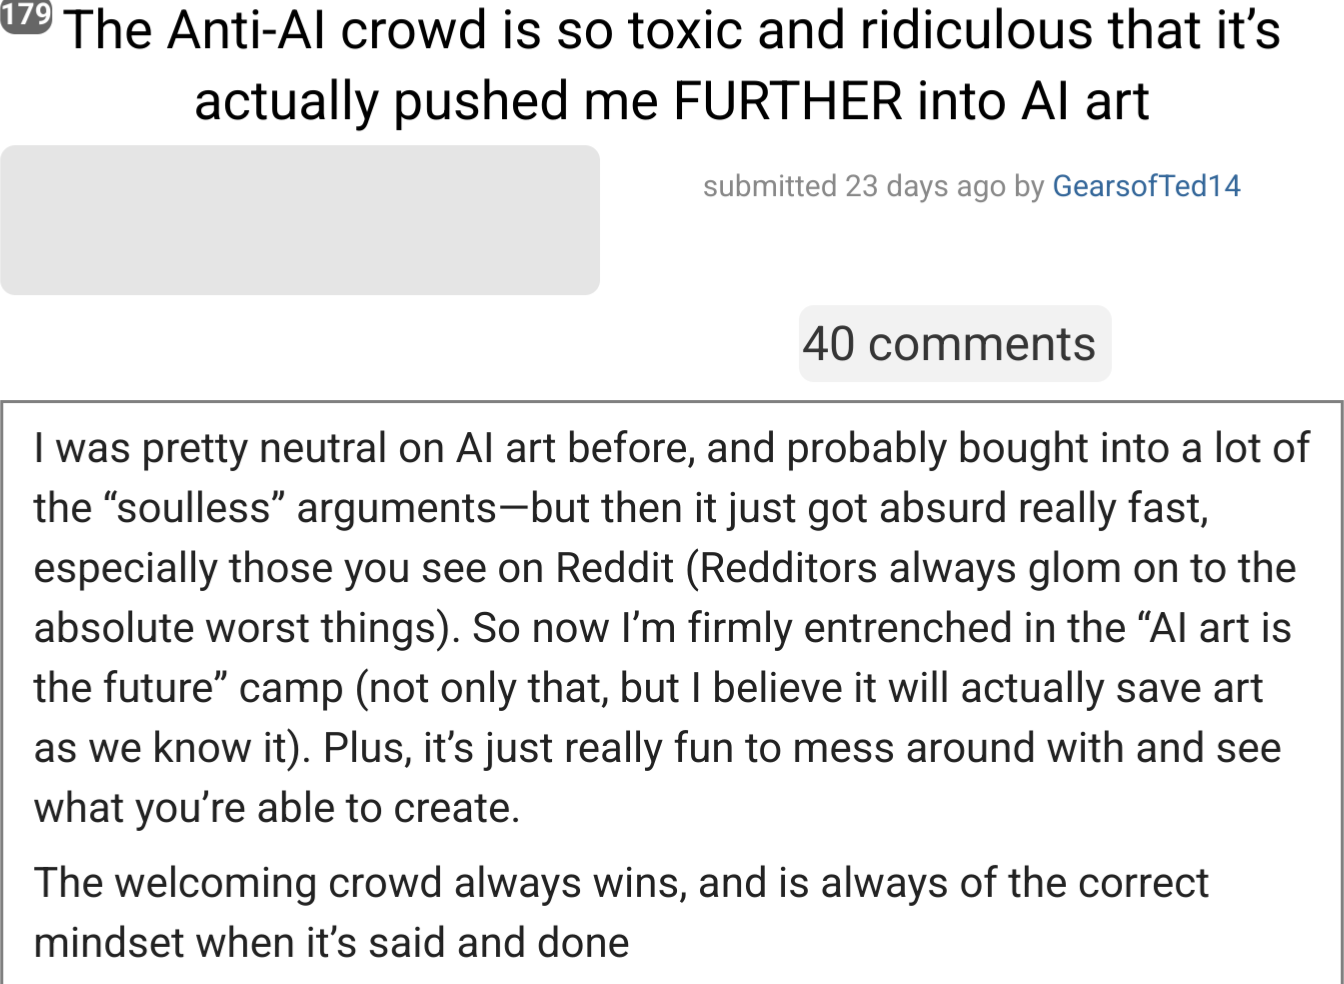 Reddit post titled "The Anti-Al crowd is so toxic and ridiculous that it's actually pushed me FURTHER into Al art"